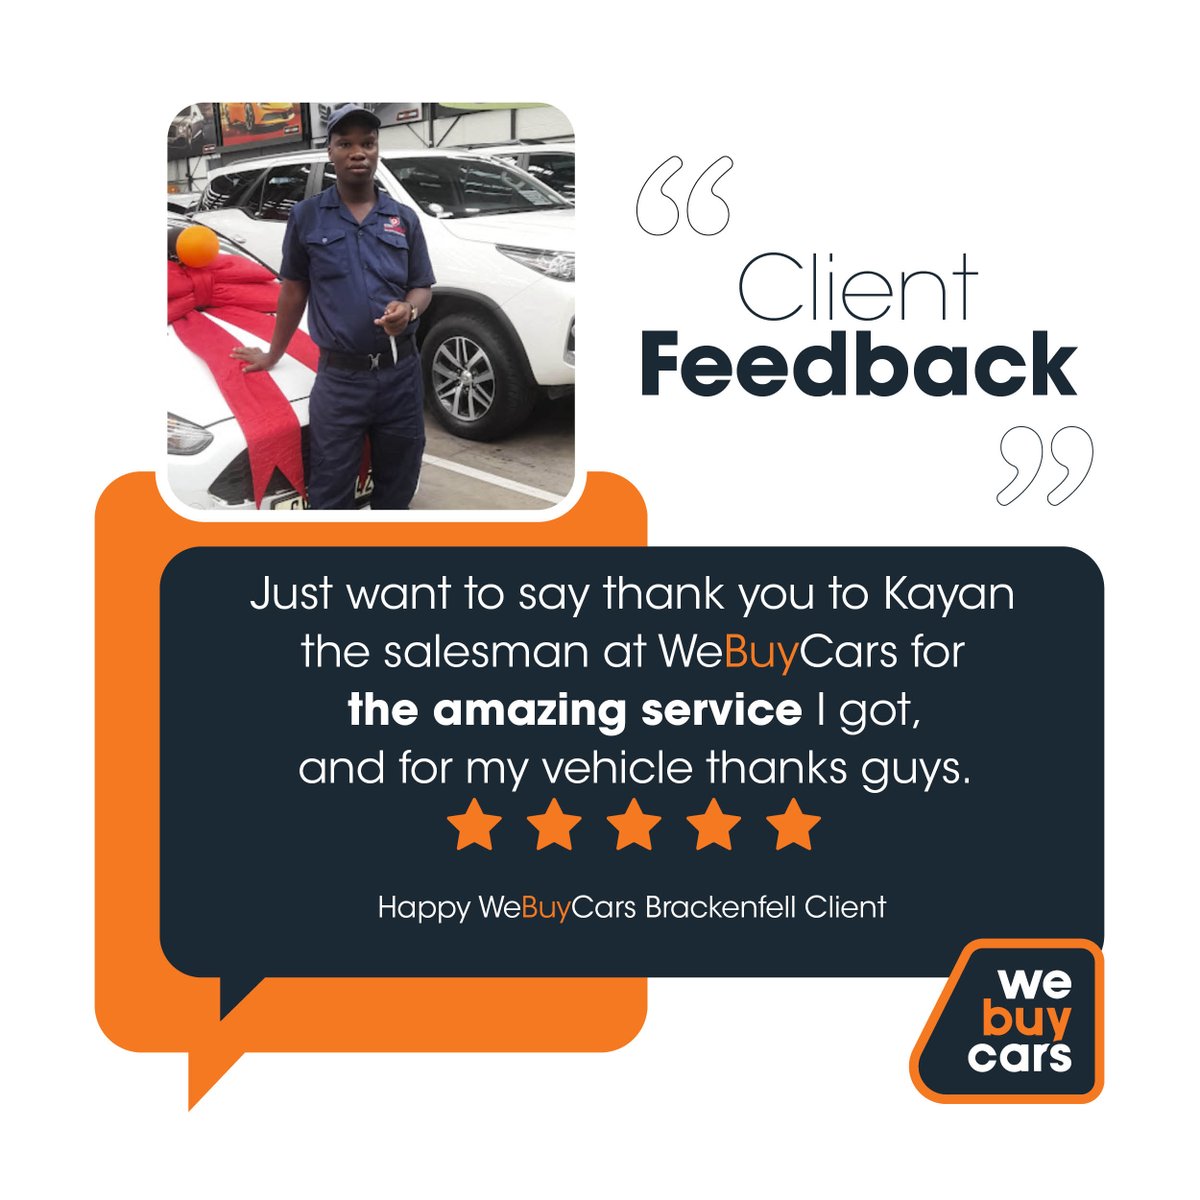 Seeing positive feedback from our #WeBuyCars customers makes us unbelievably happy 😊🙌

#carsforsale #preownedcars #usedcars #usedcarsforsale #carshopping #carfinance #autosales #carsales #carlifestyle #review